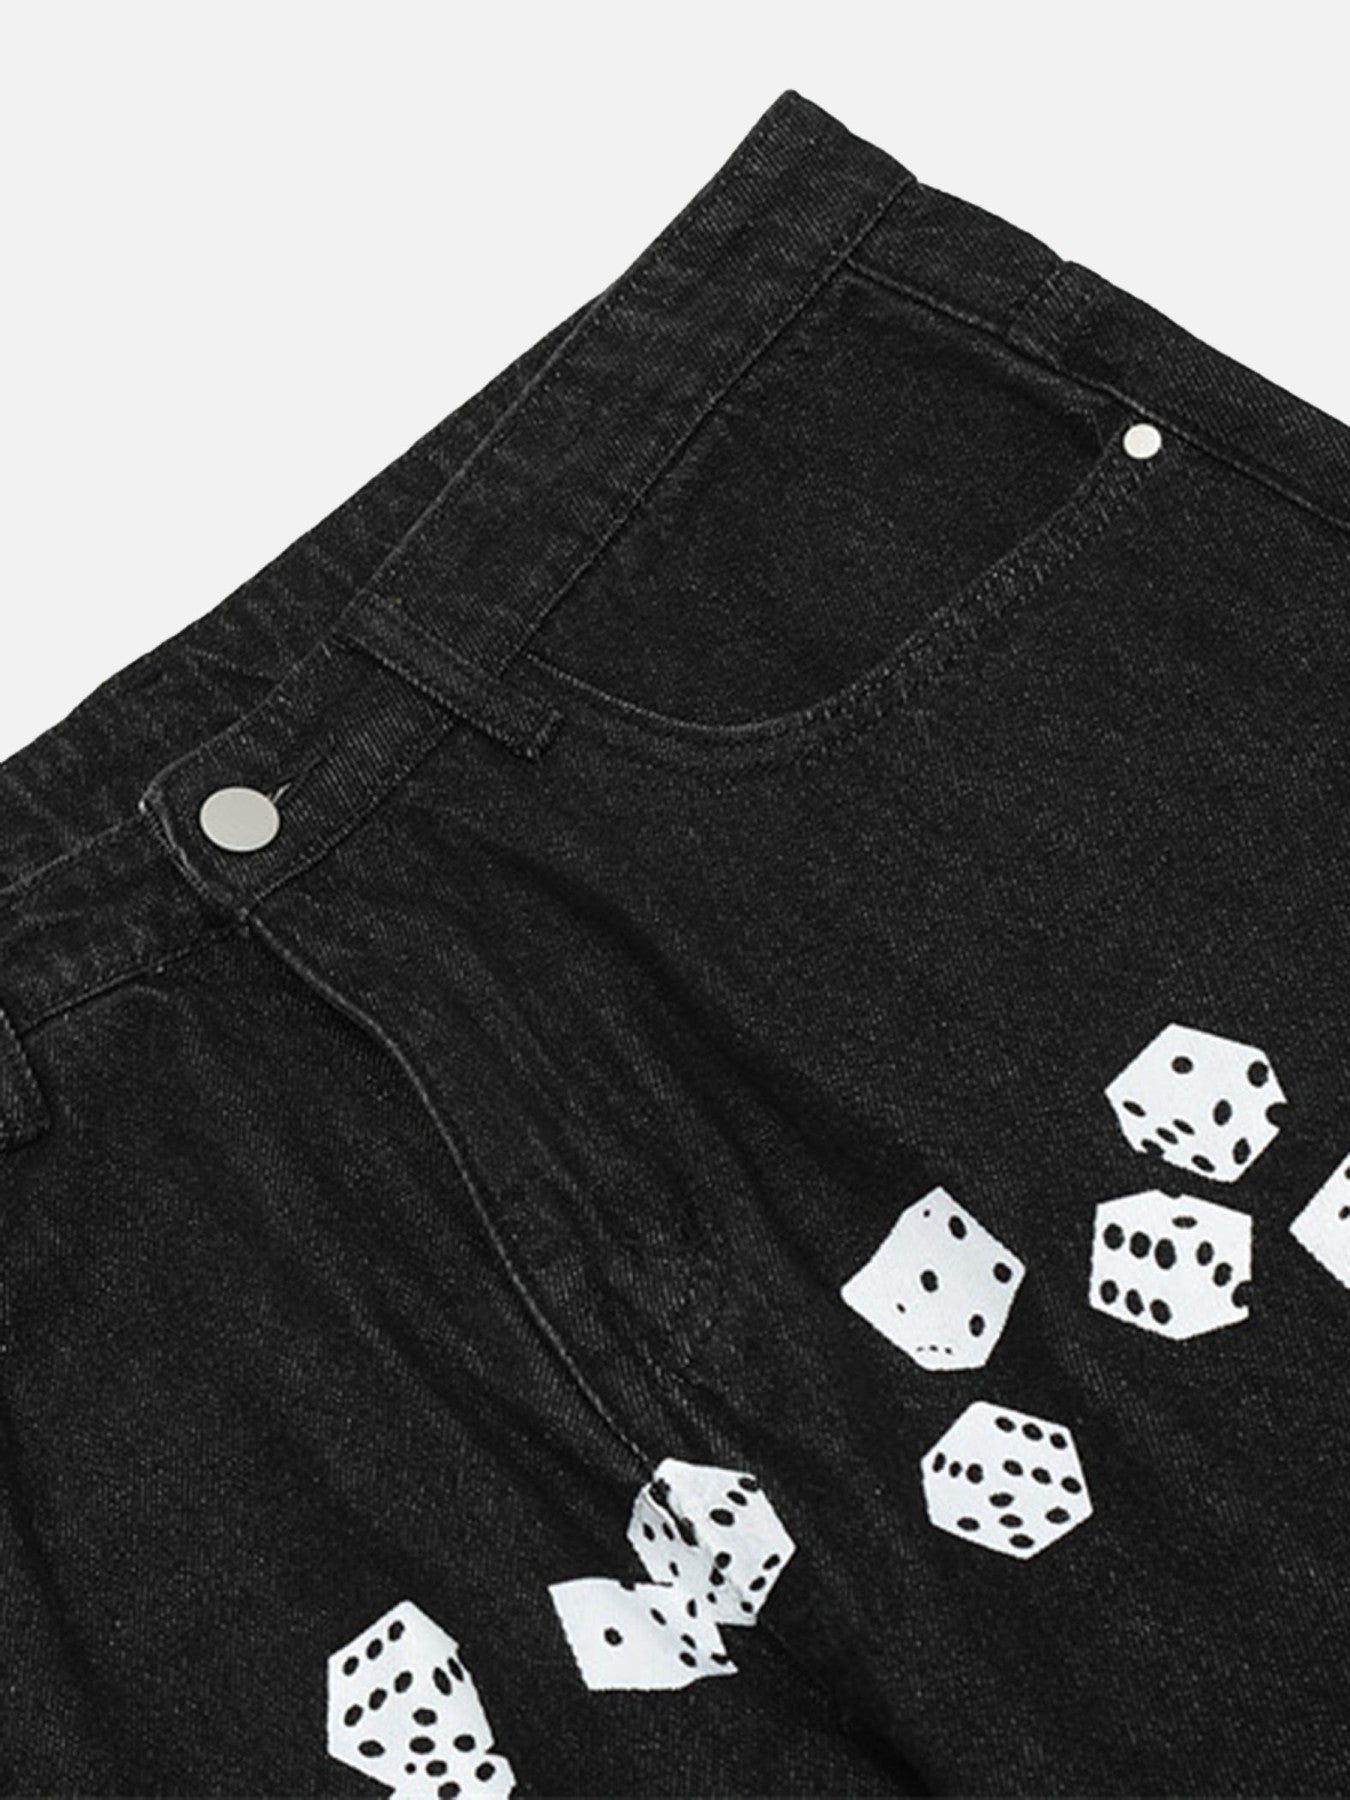 The Supermade Vintage Dice Print Jeans